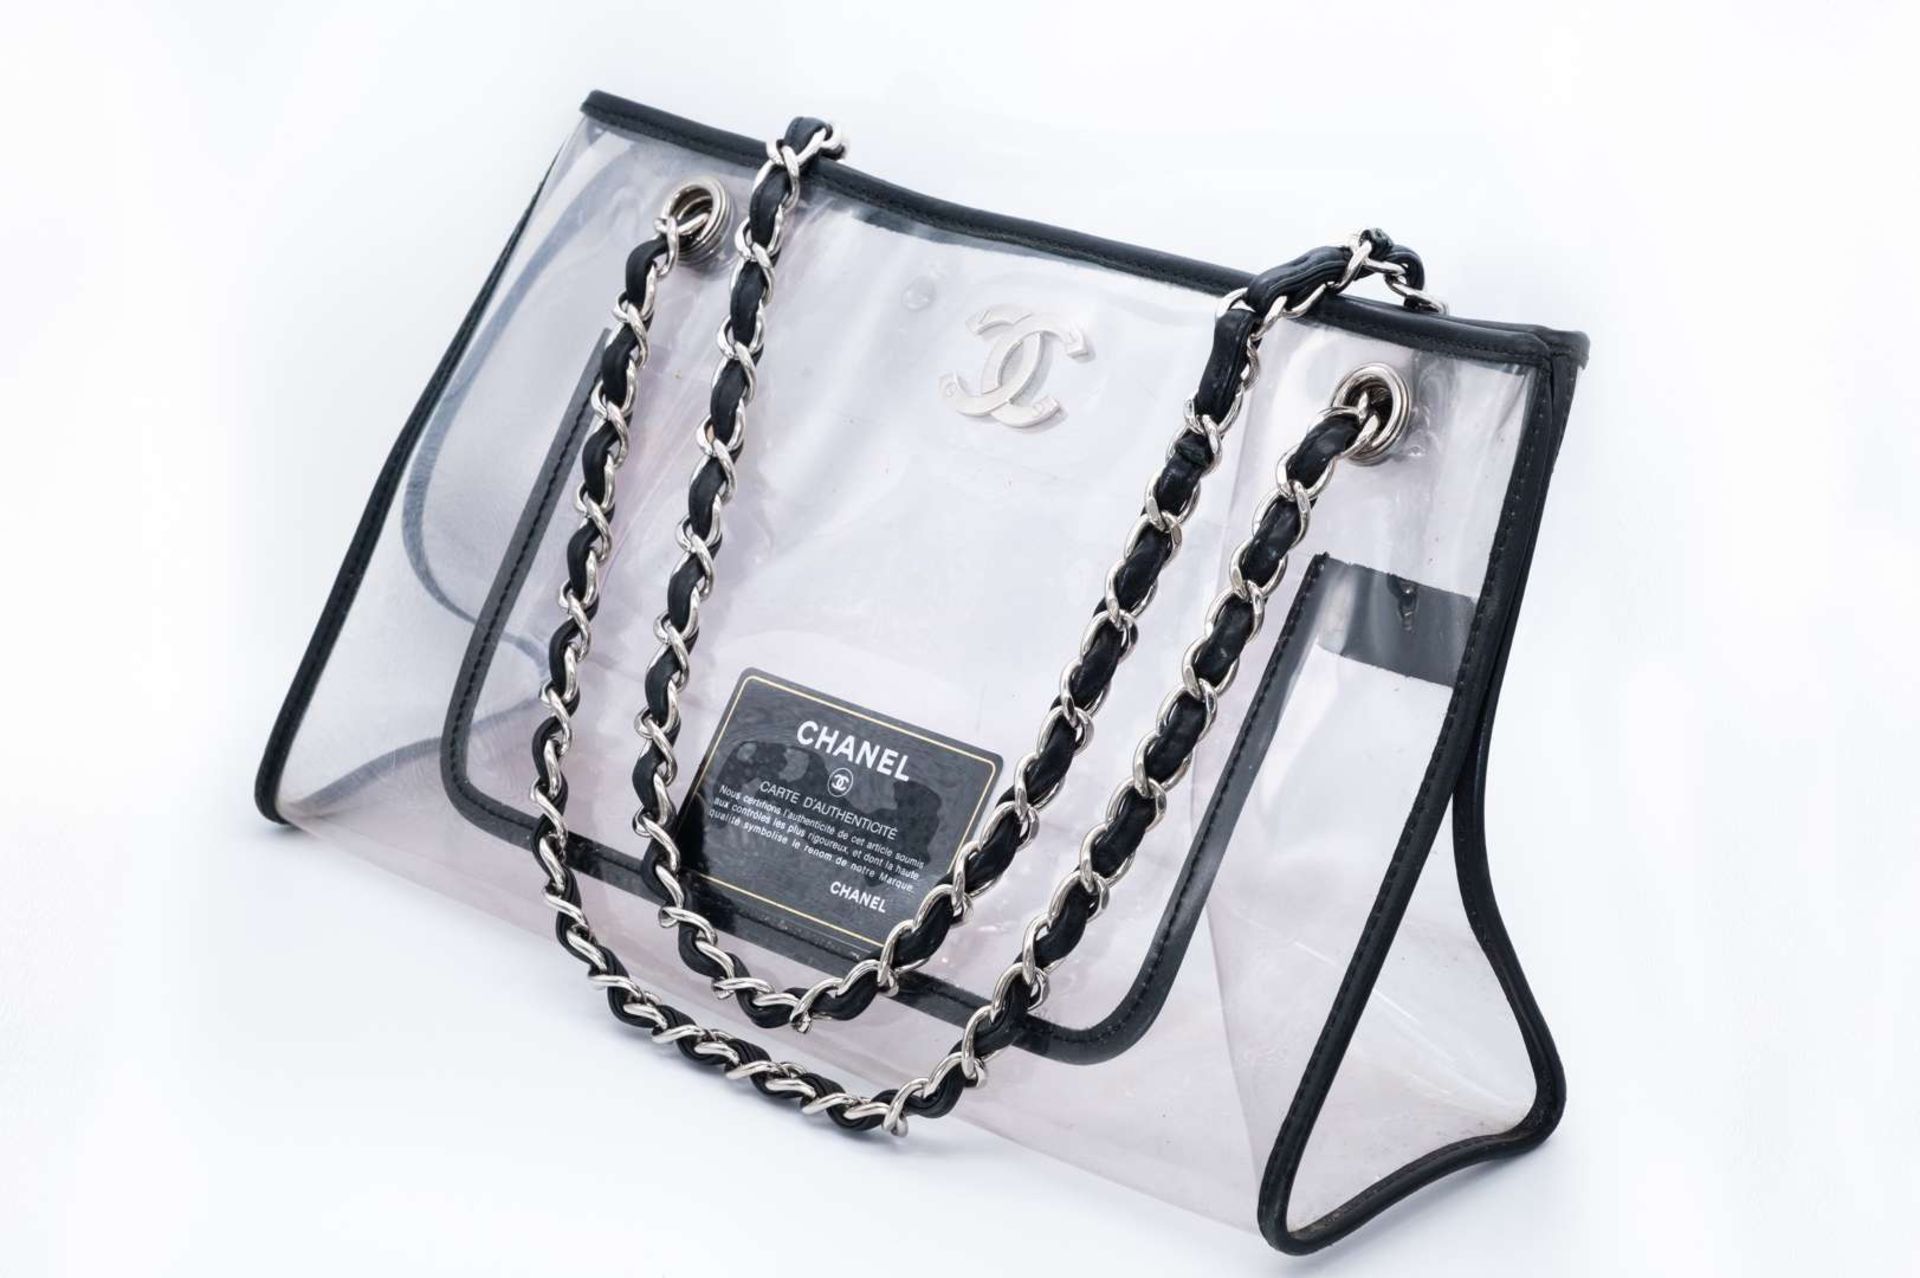 CHANEL, PVC tote bag, with black leather trim and silver curb link chain carry strap. 2006-2008 - Image 3 of 4